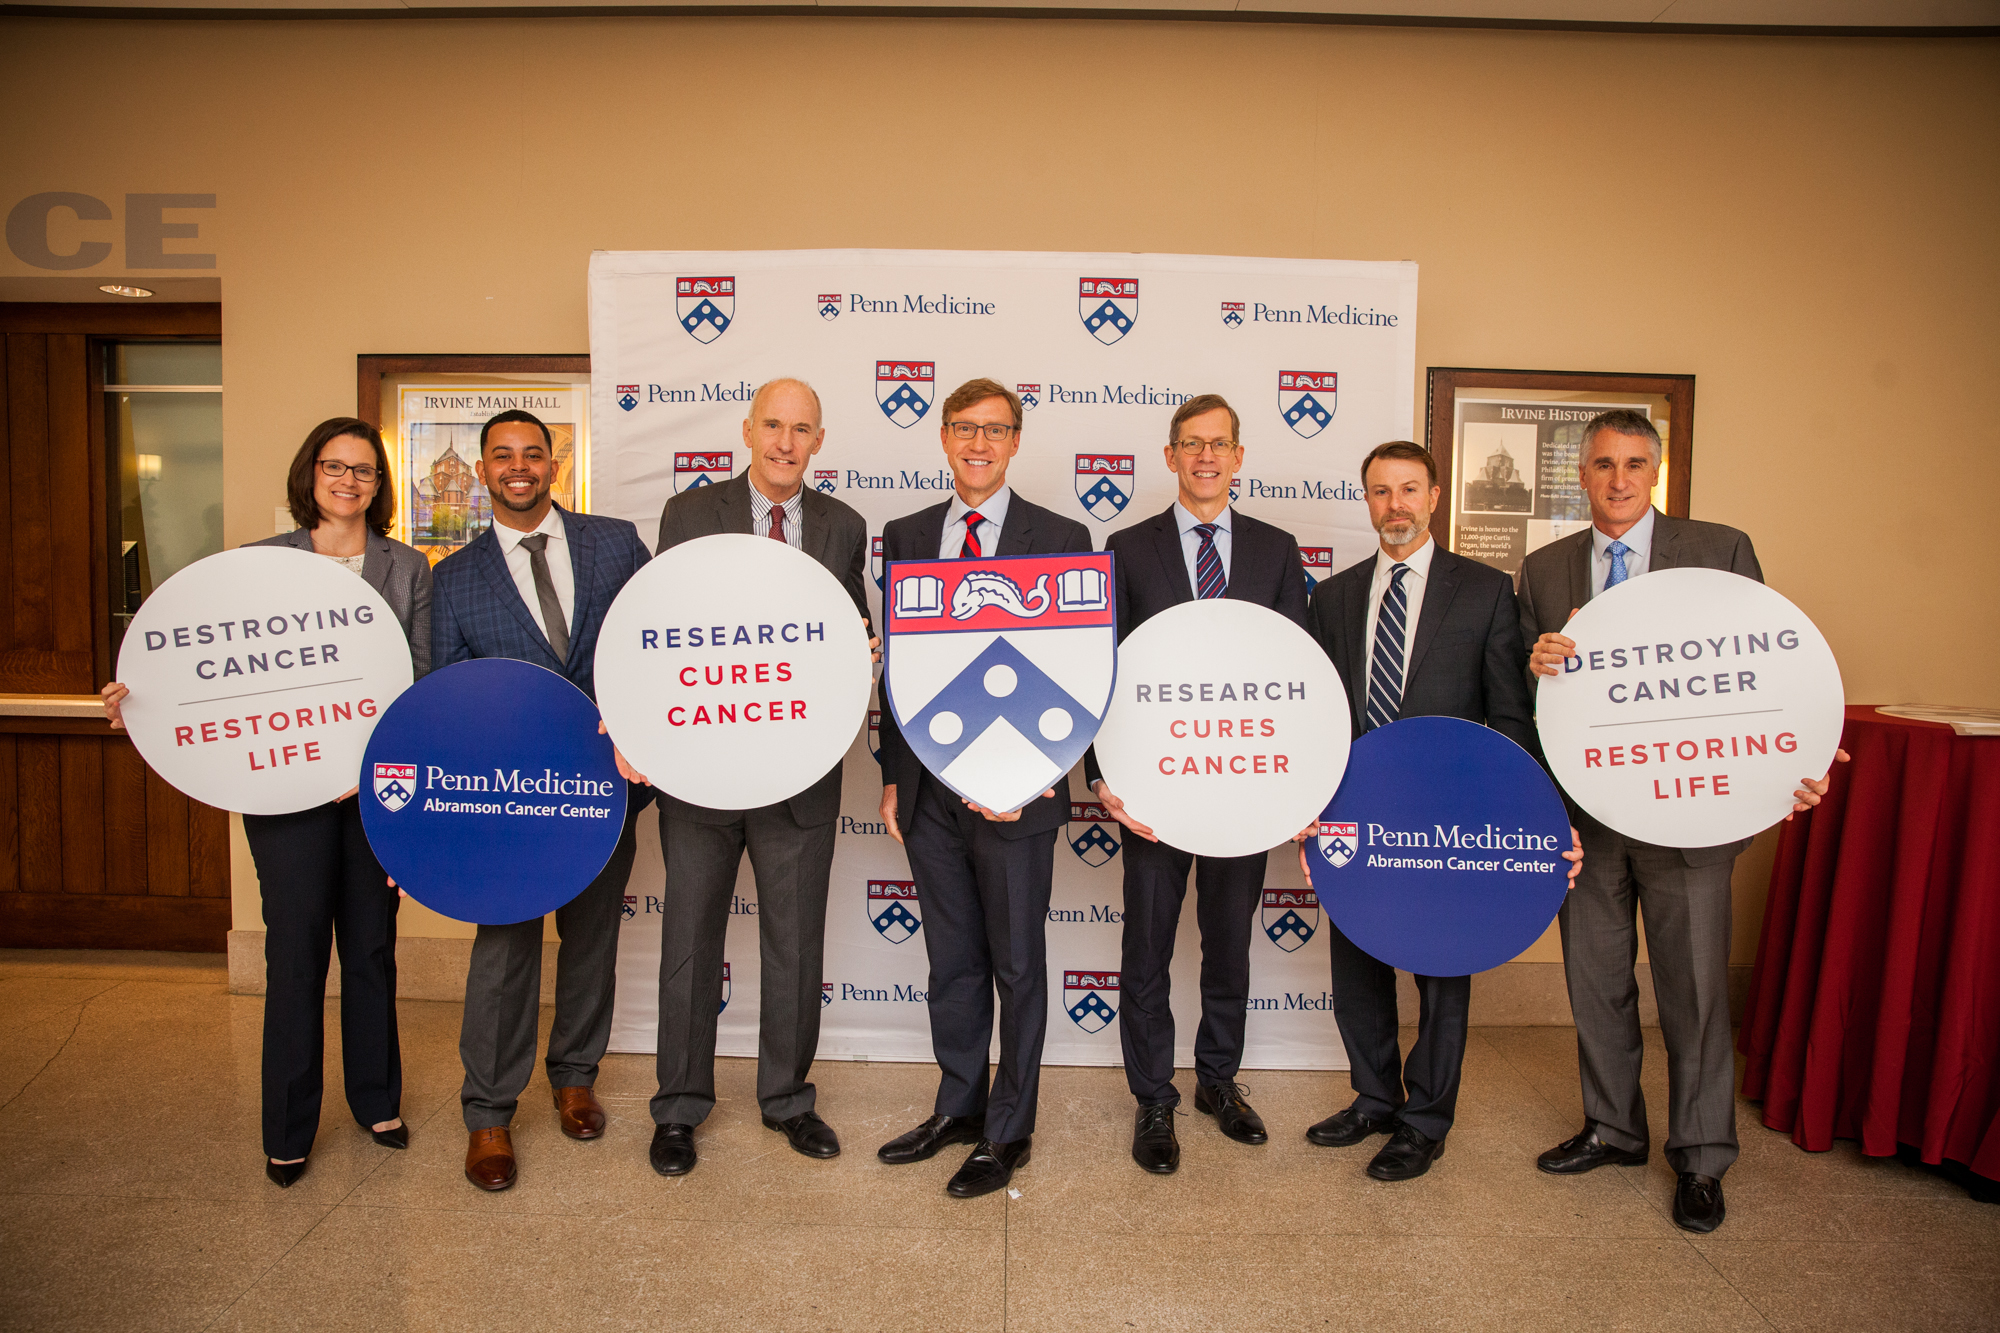 Penn Medicine researchers pose for a photo after the panel holding signs that say Destroying Cancer, Restoring Life; Research Cures Cancer, and Penn Medicine/Abramson Cancer Center